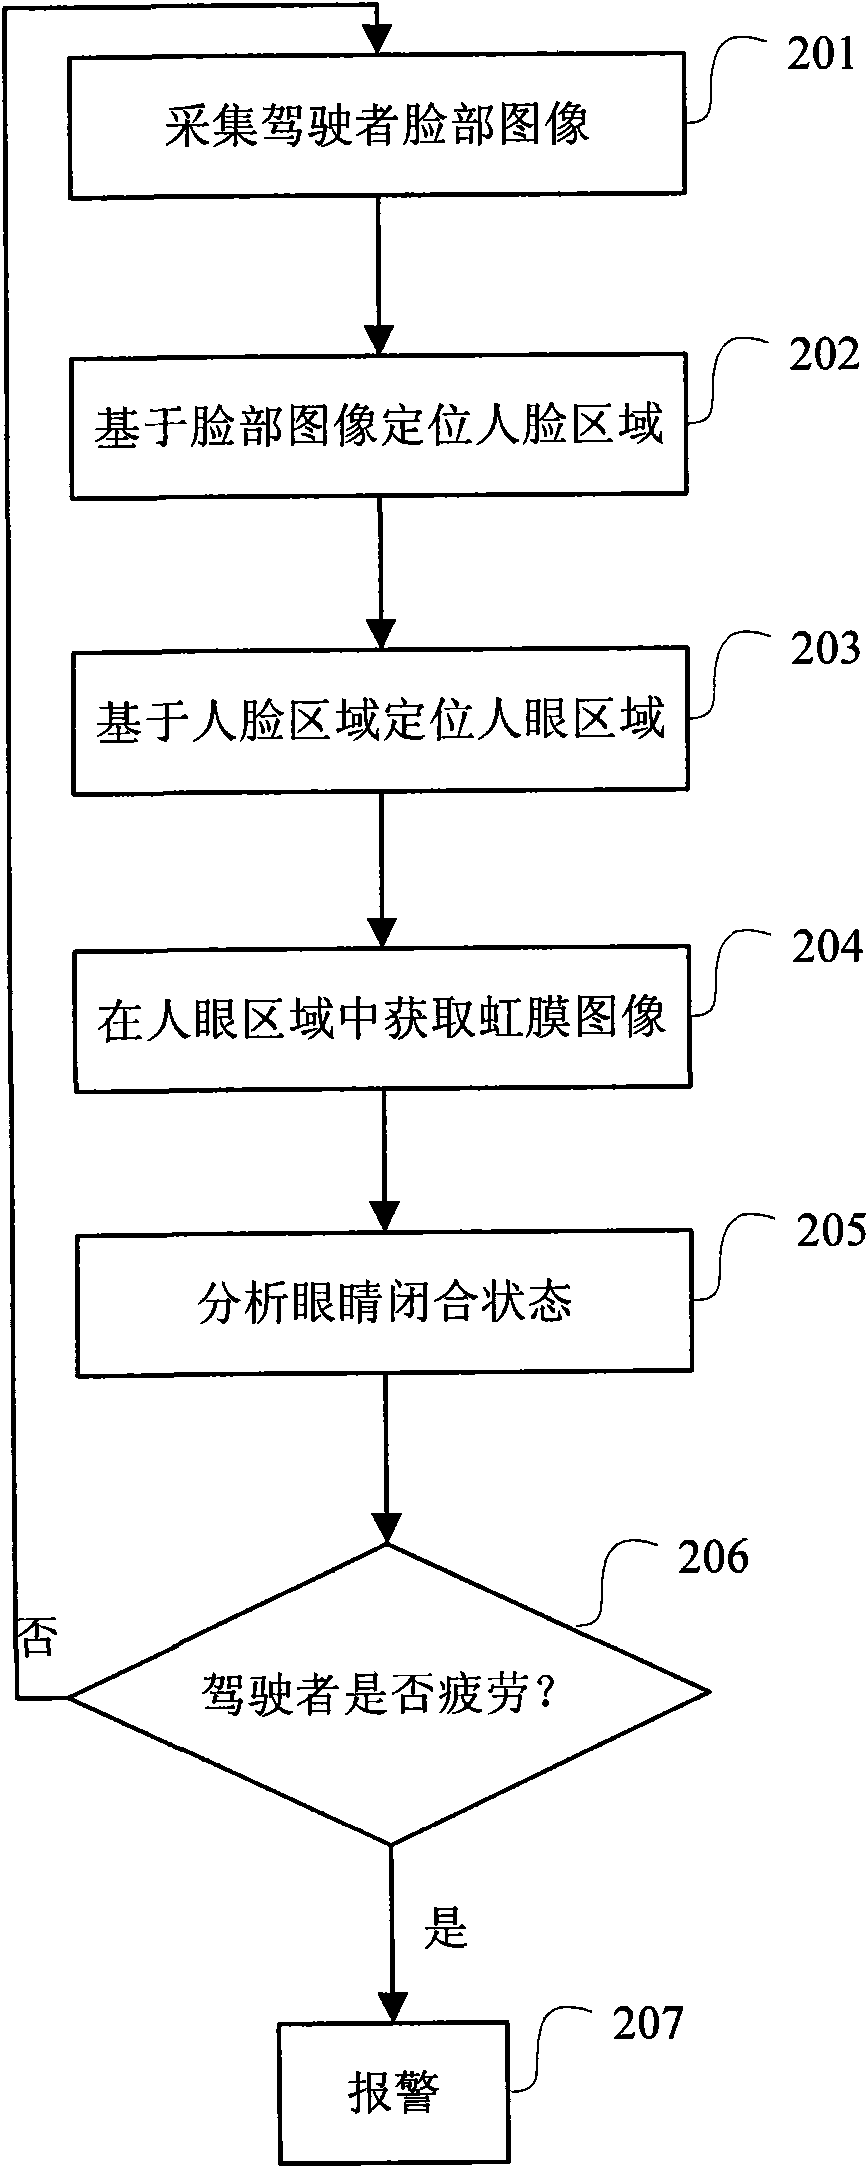 Machine vision based fatigue driving monitoring method and system